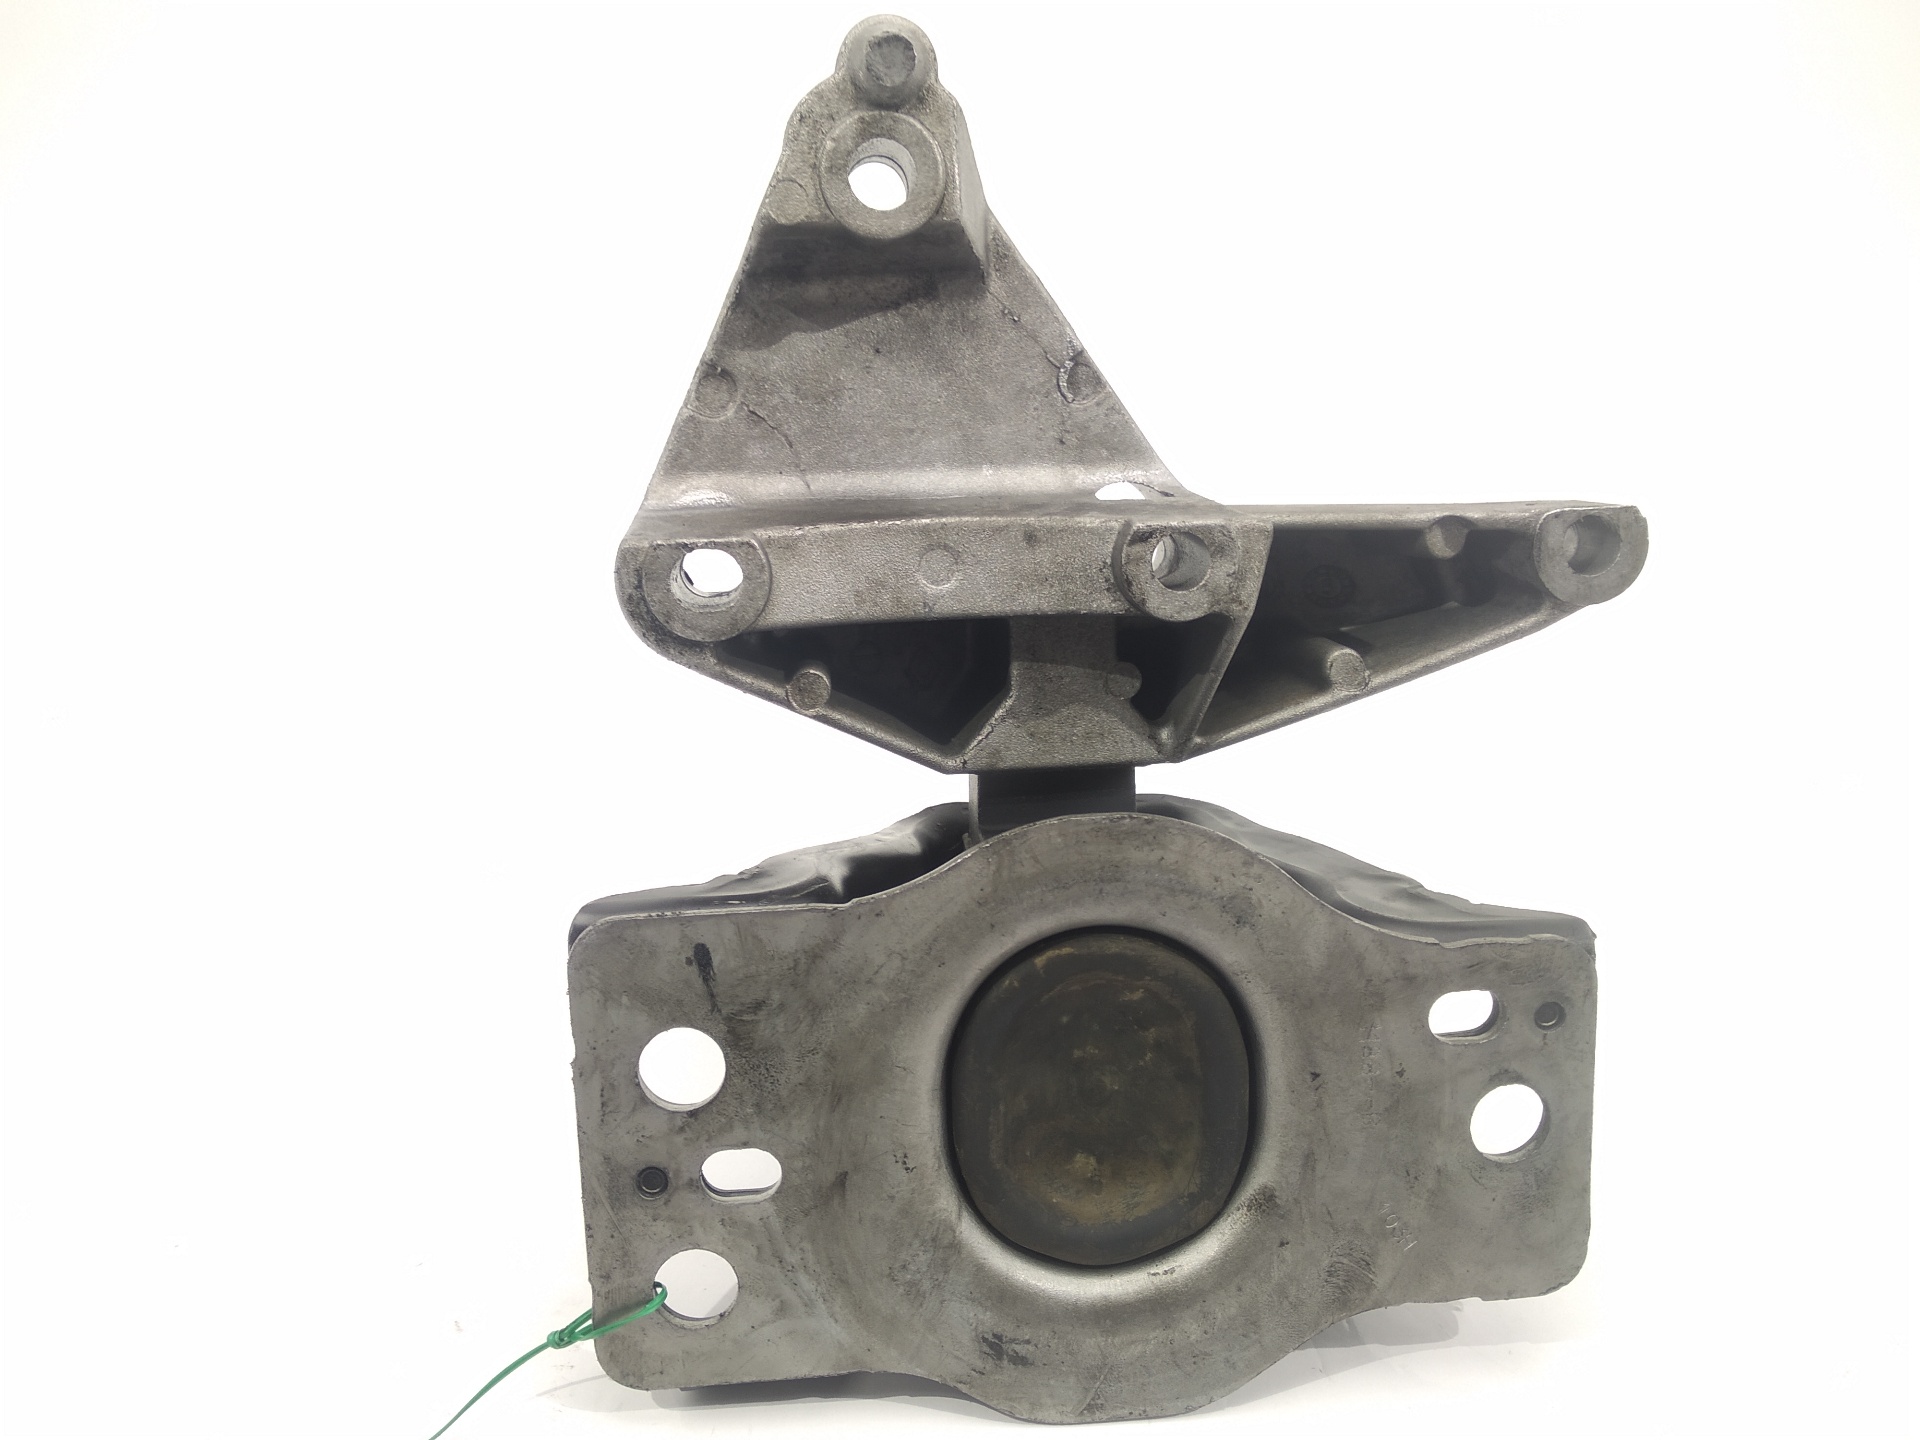 RENAULT Scenic 2 generation (2003-2010) Right Side Engine Mount 8200592642, 8200592642, 8200592642 24513057